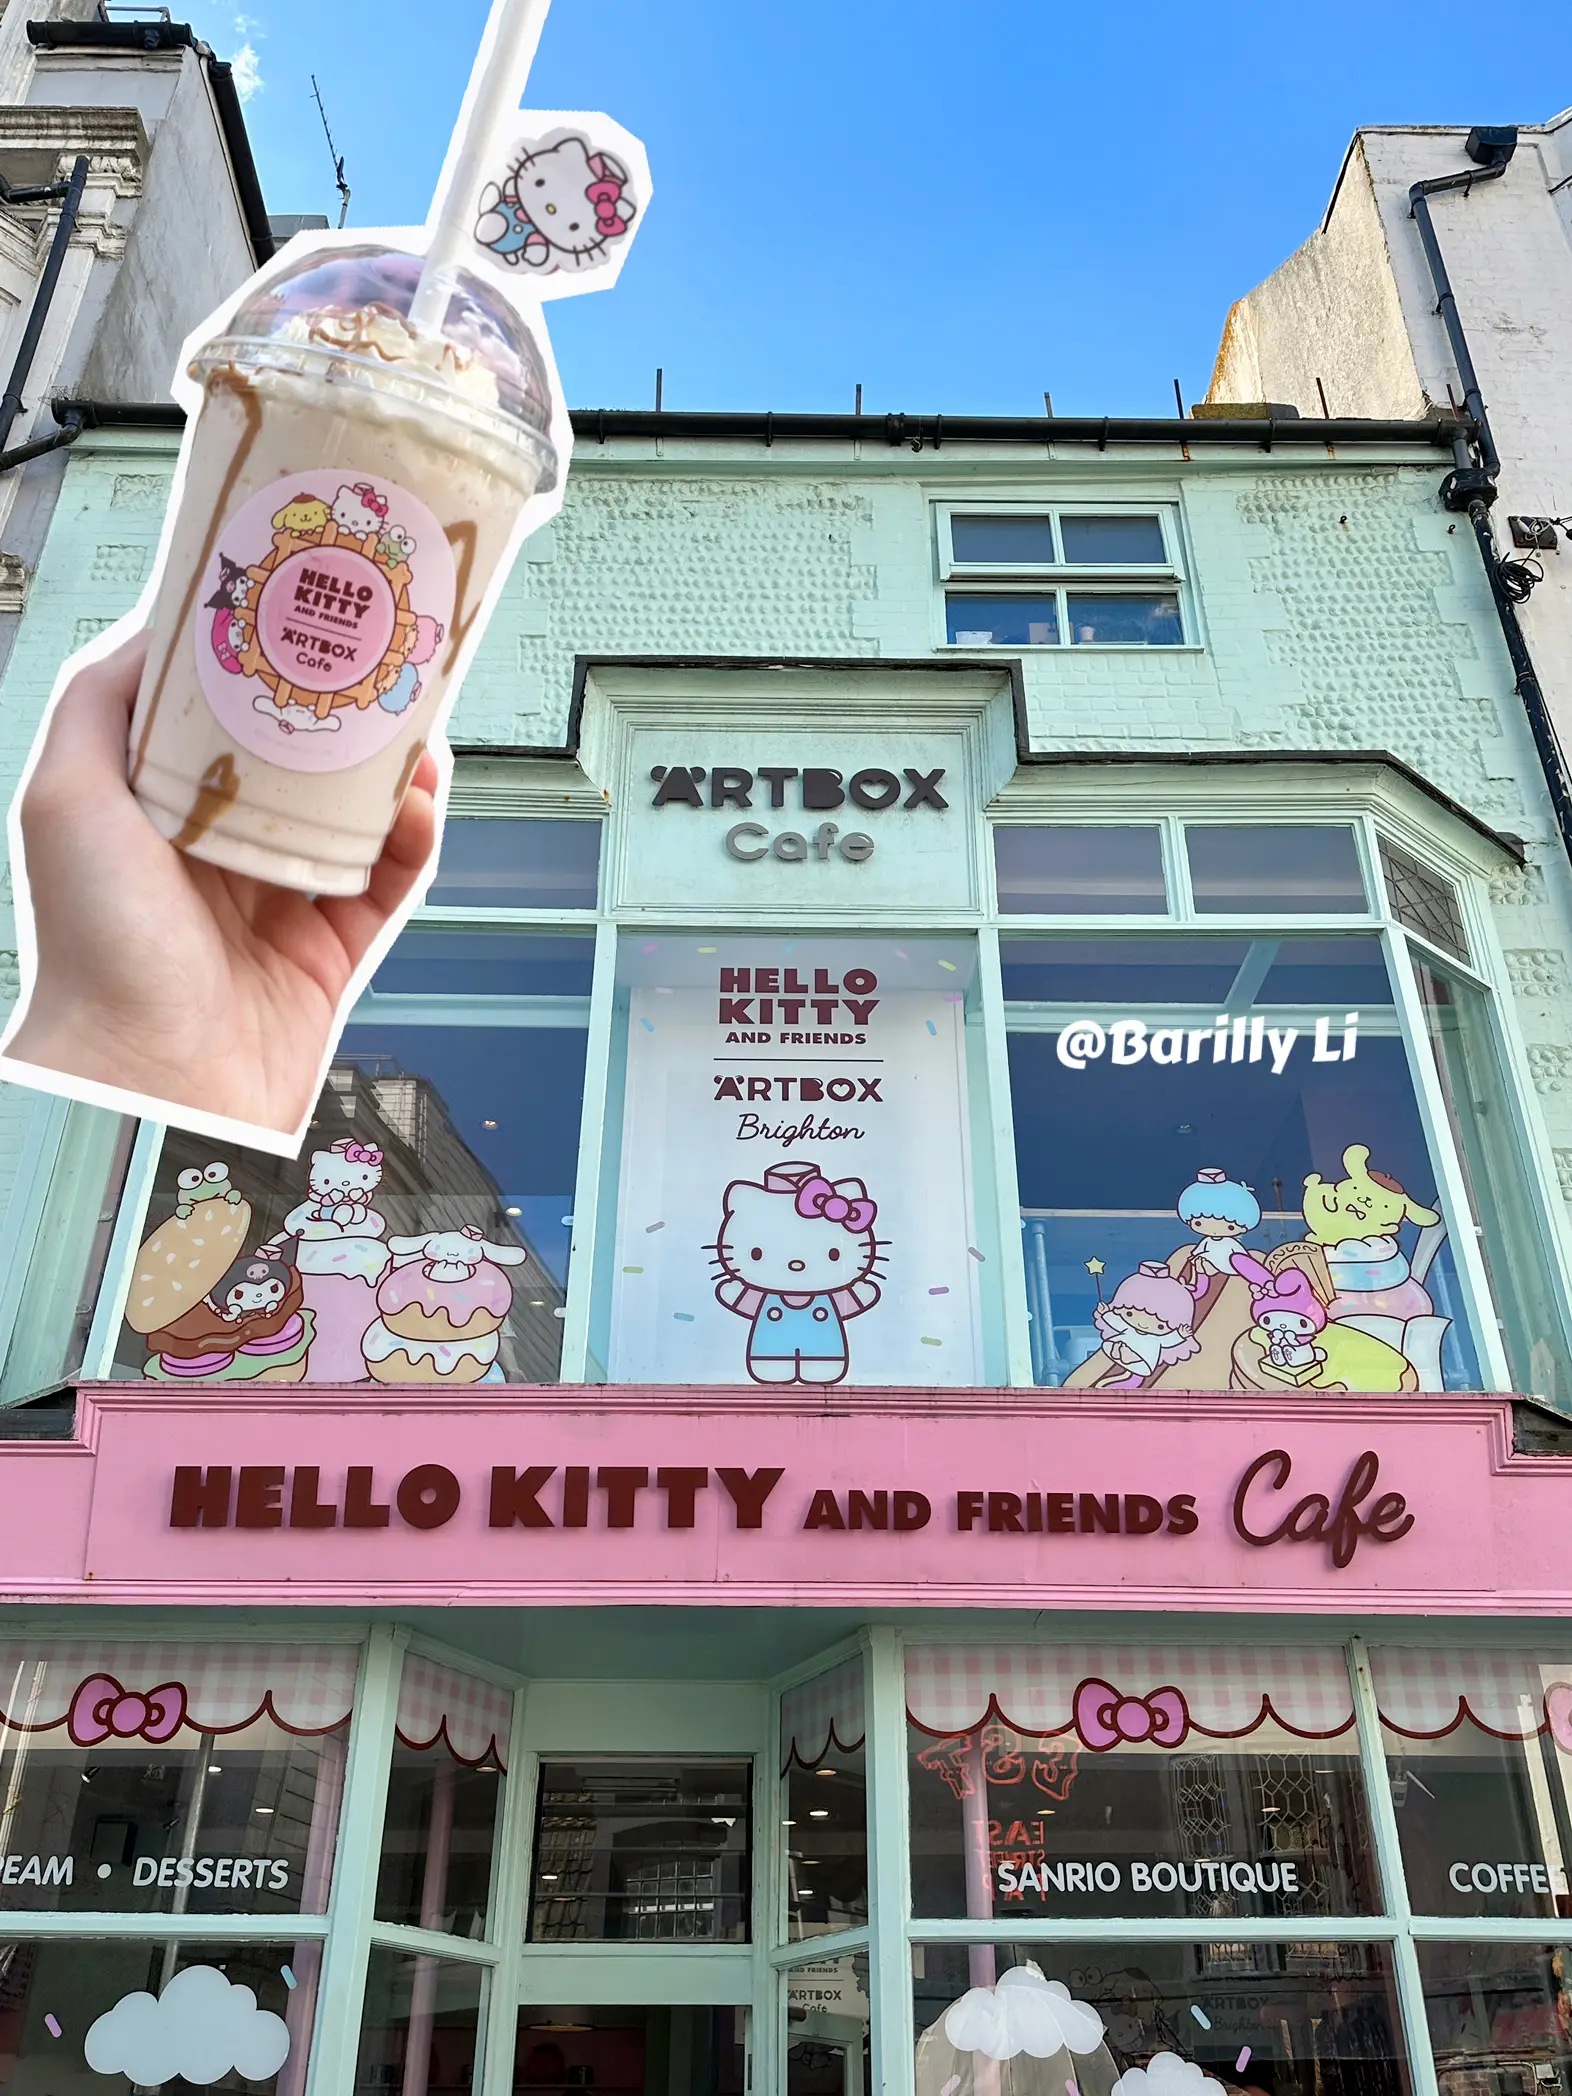 Went to the hello kitty cafe in Irvine, CA with a friend i haven't